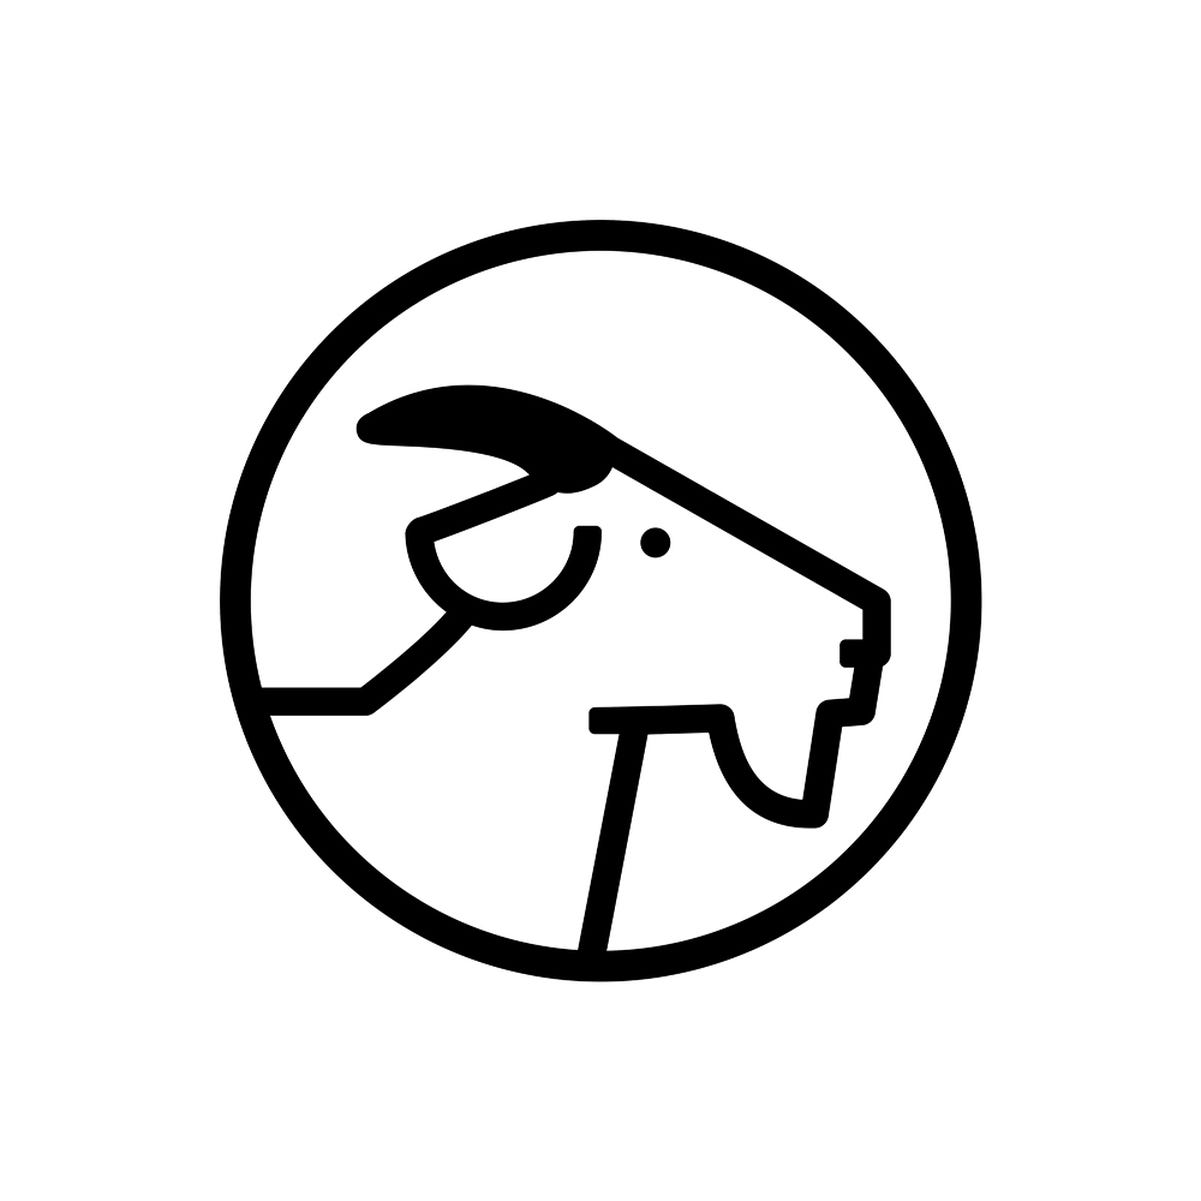 GOAT adds Apparel and Accessories to their Product Offerings | by steve  natto | Medium